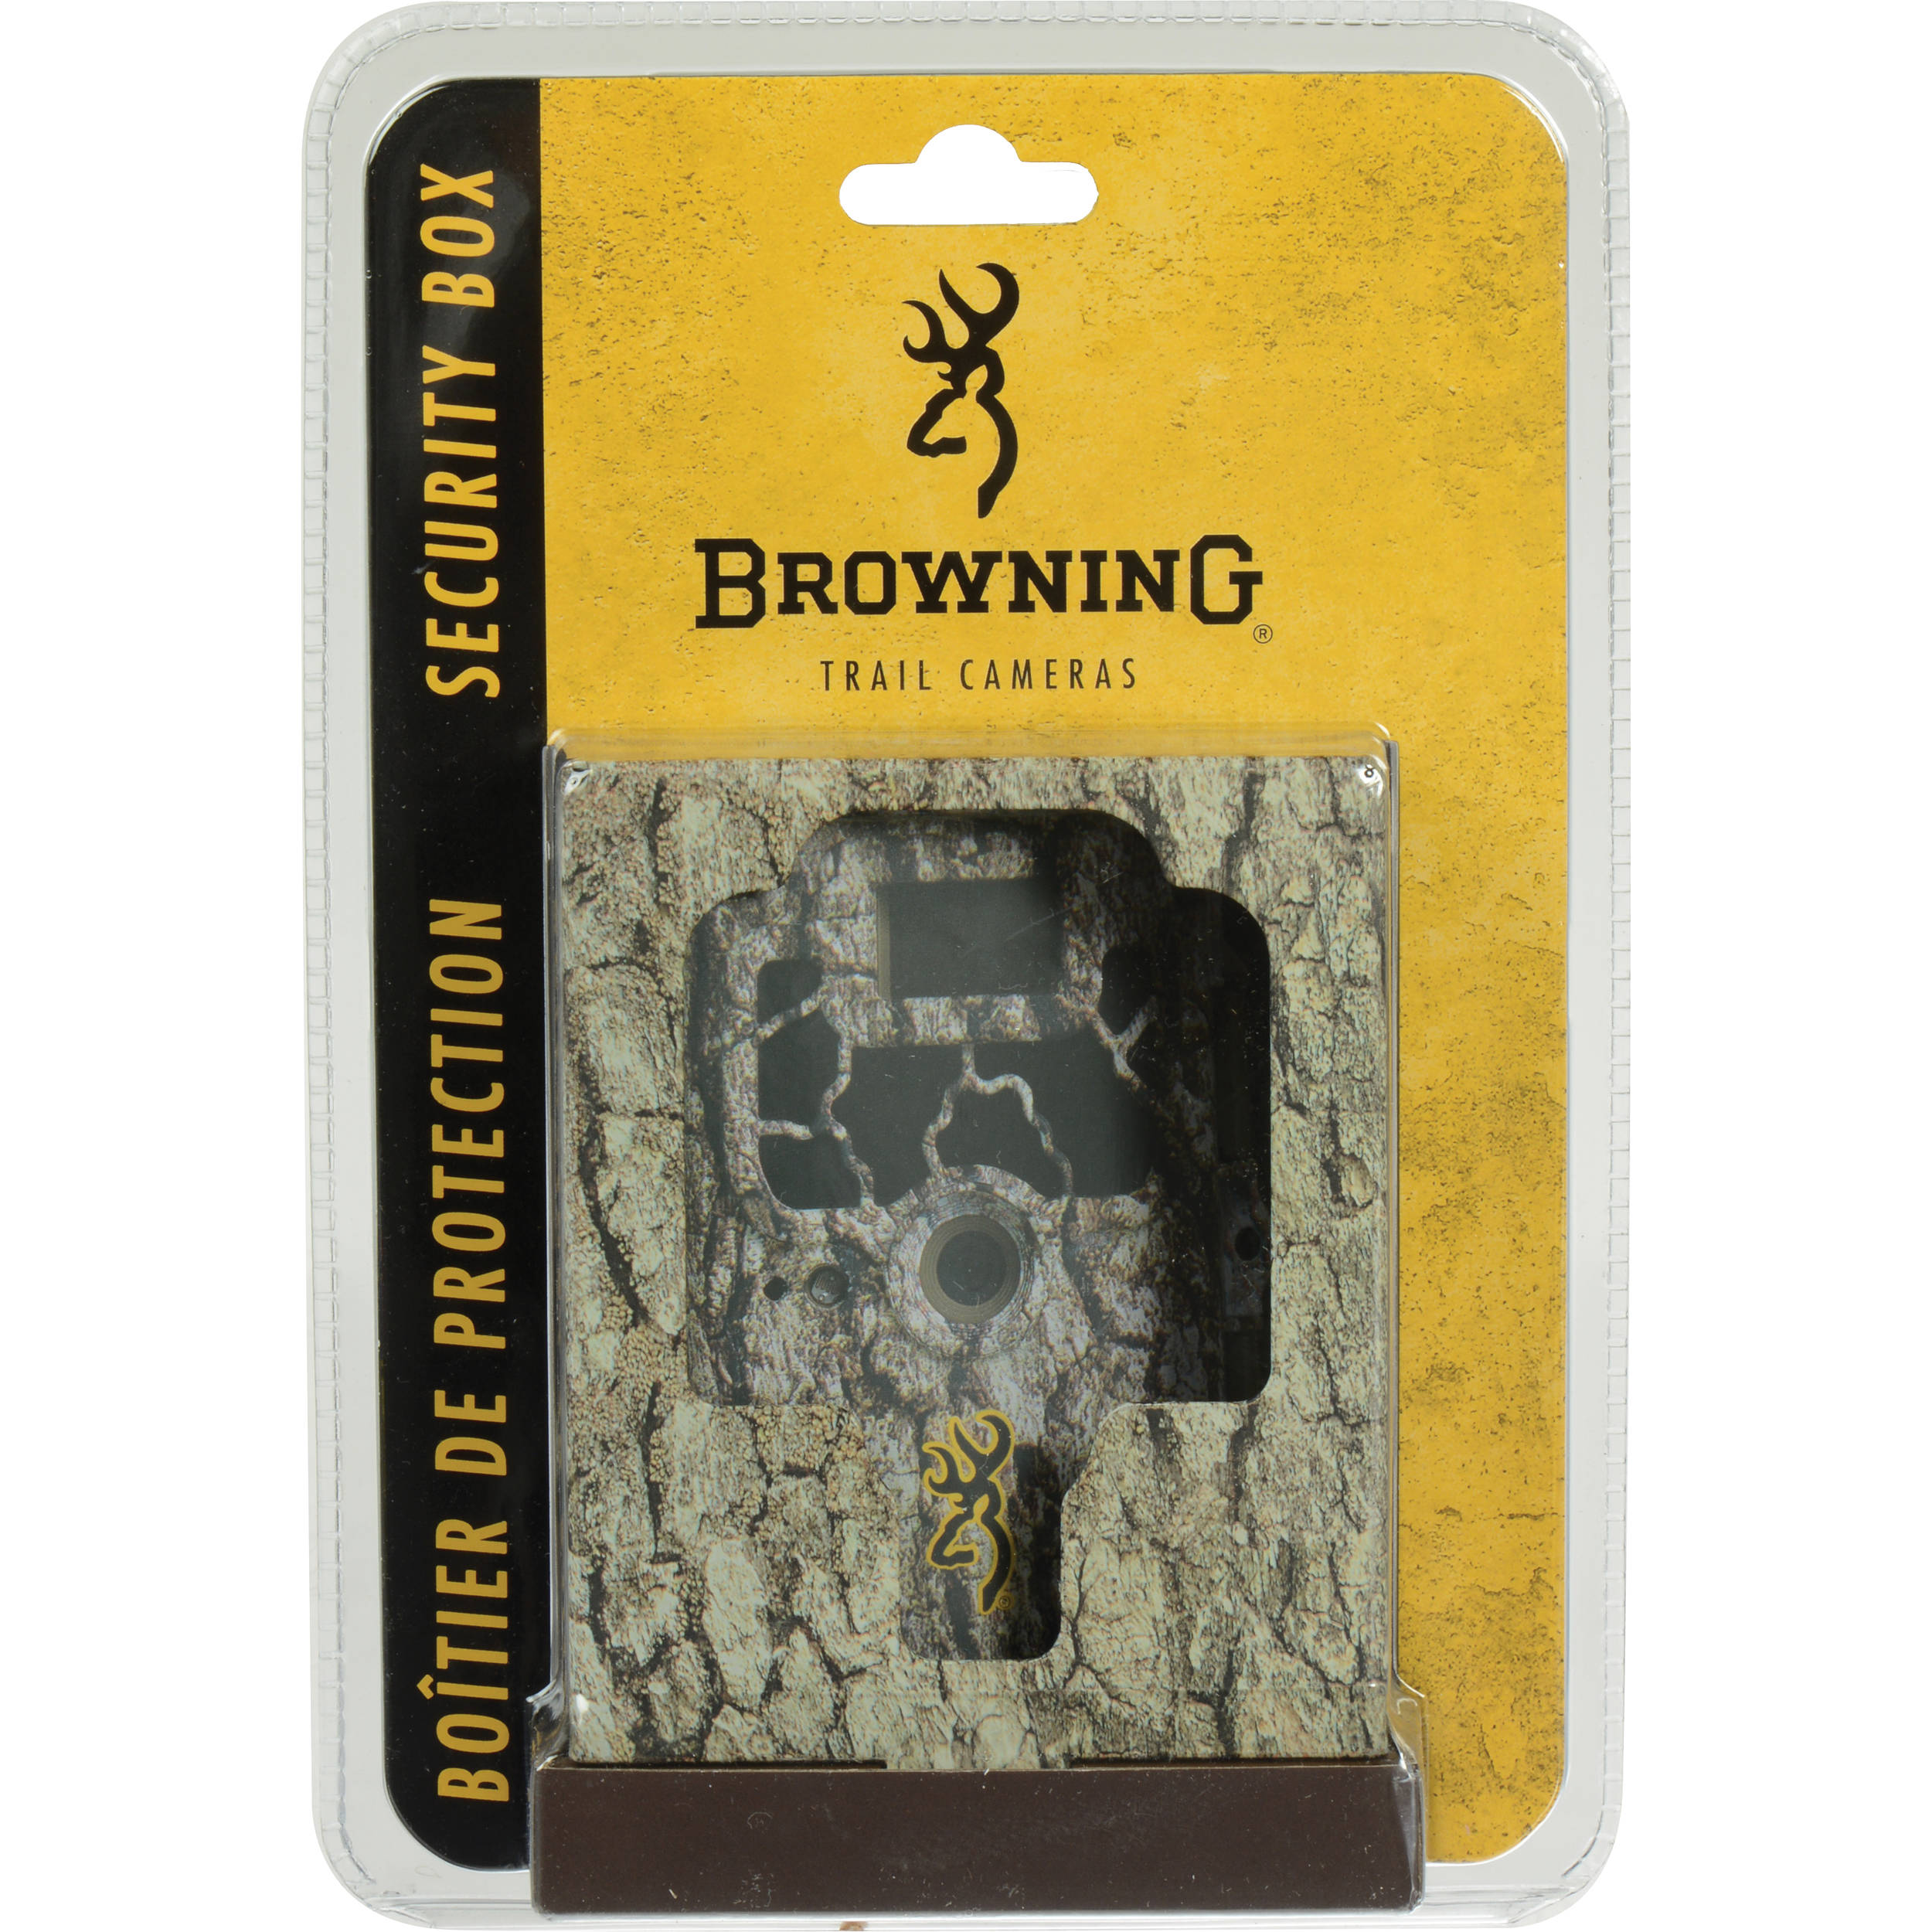 Browning force